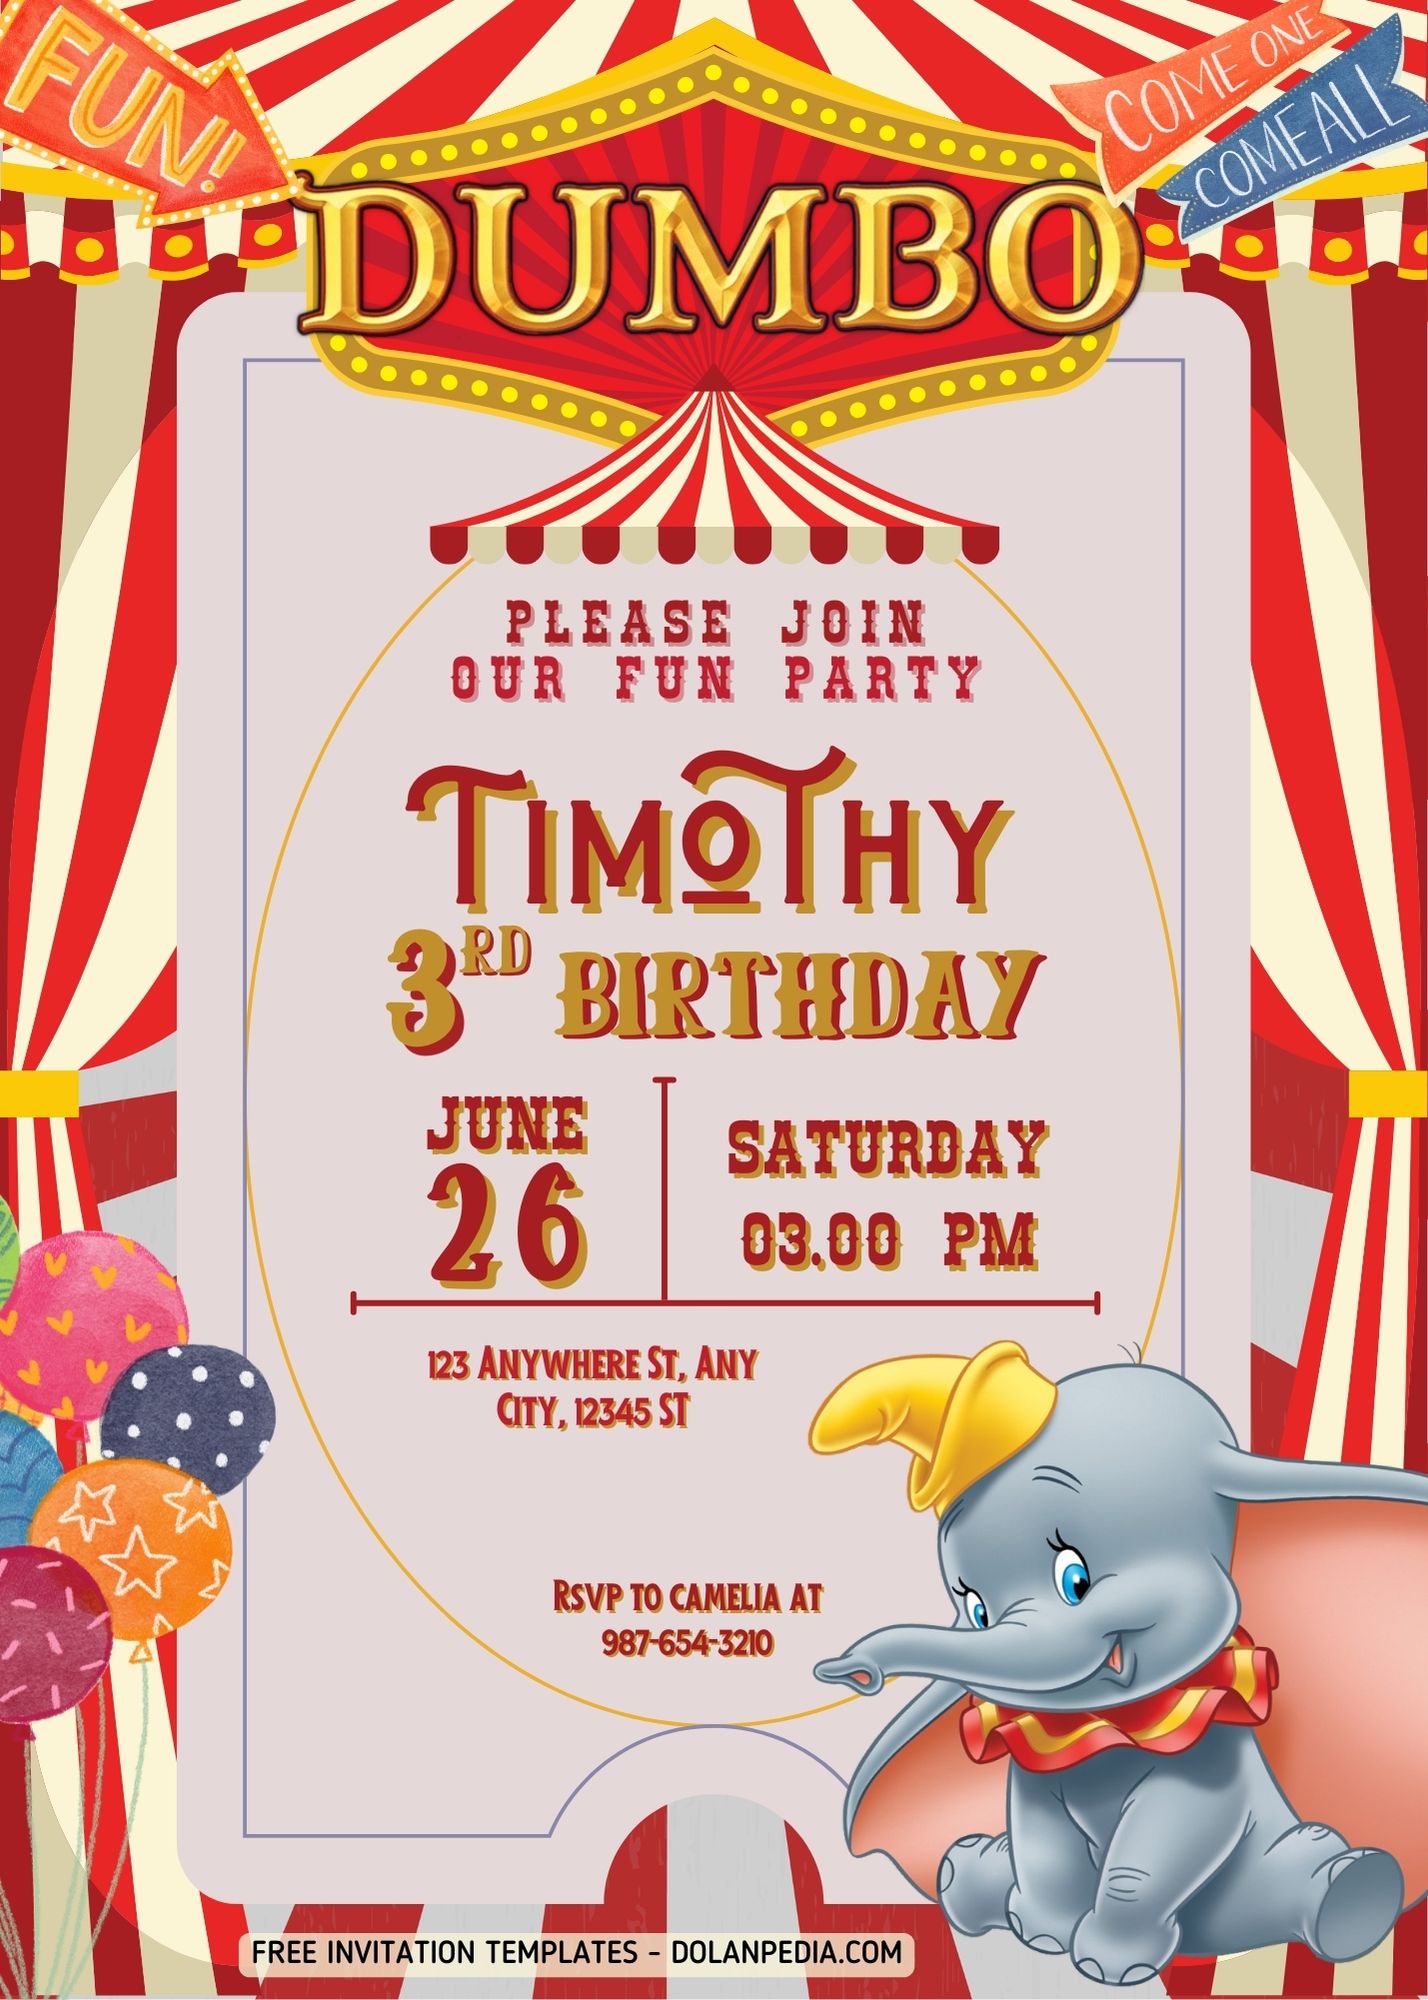 FREE Dumbo Circus Carnival Party Invitation Templates